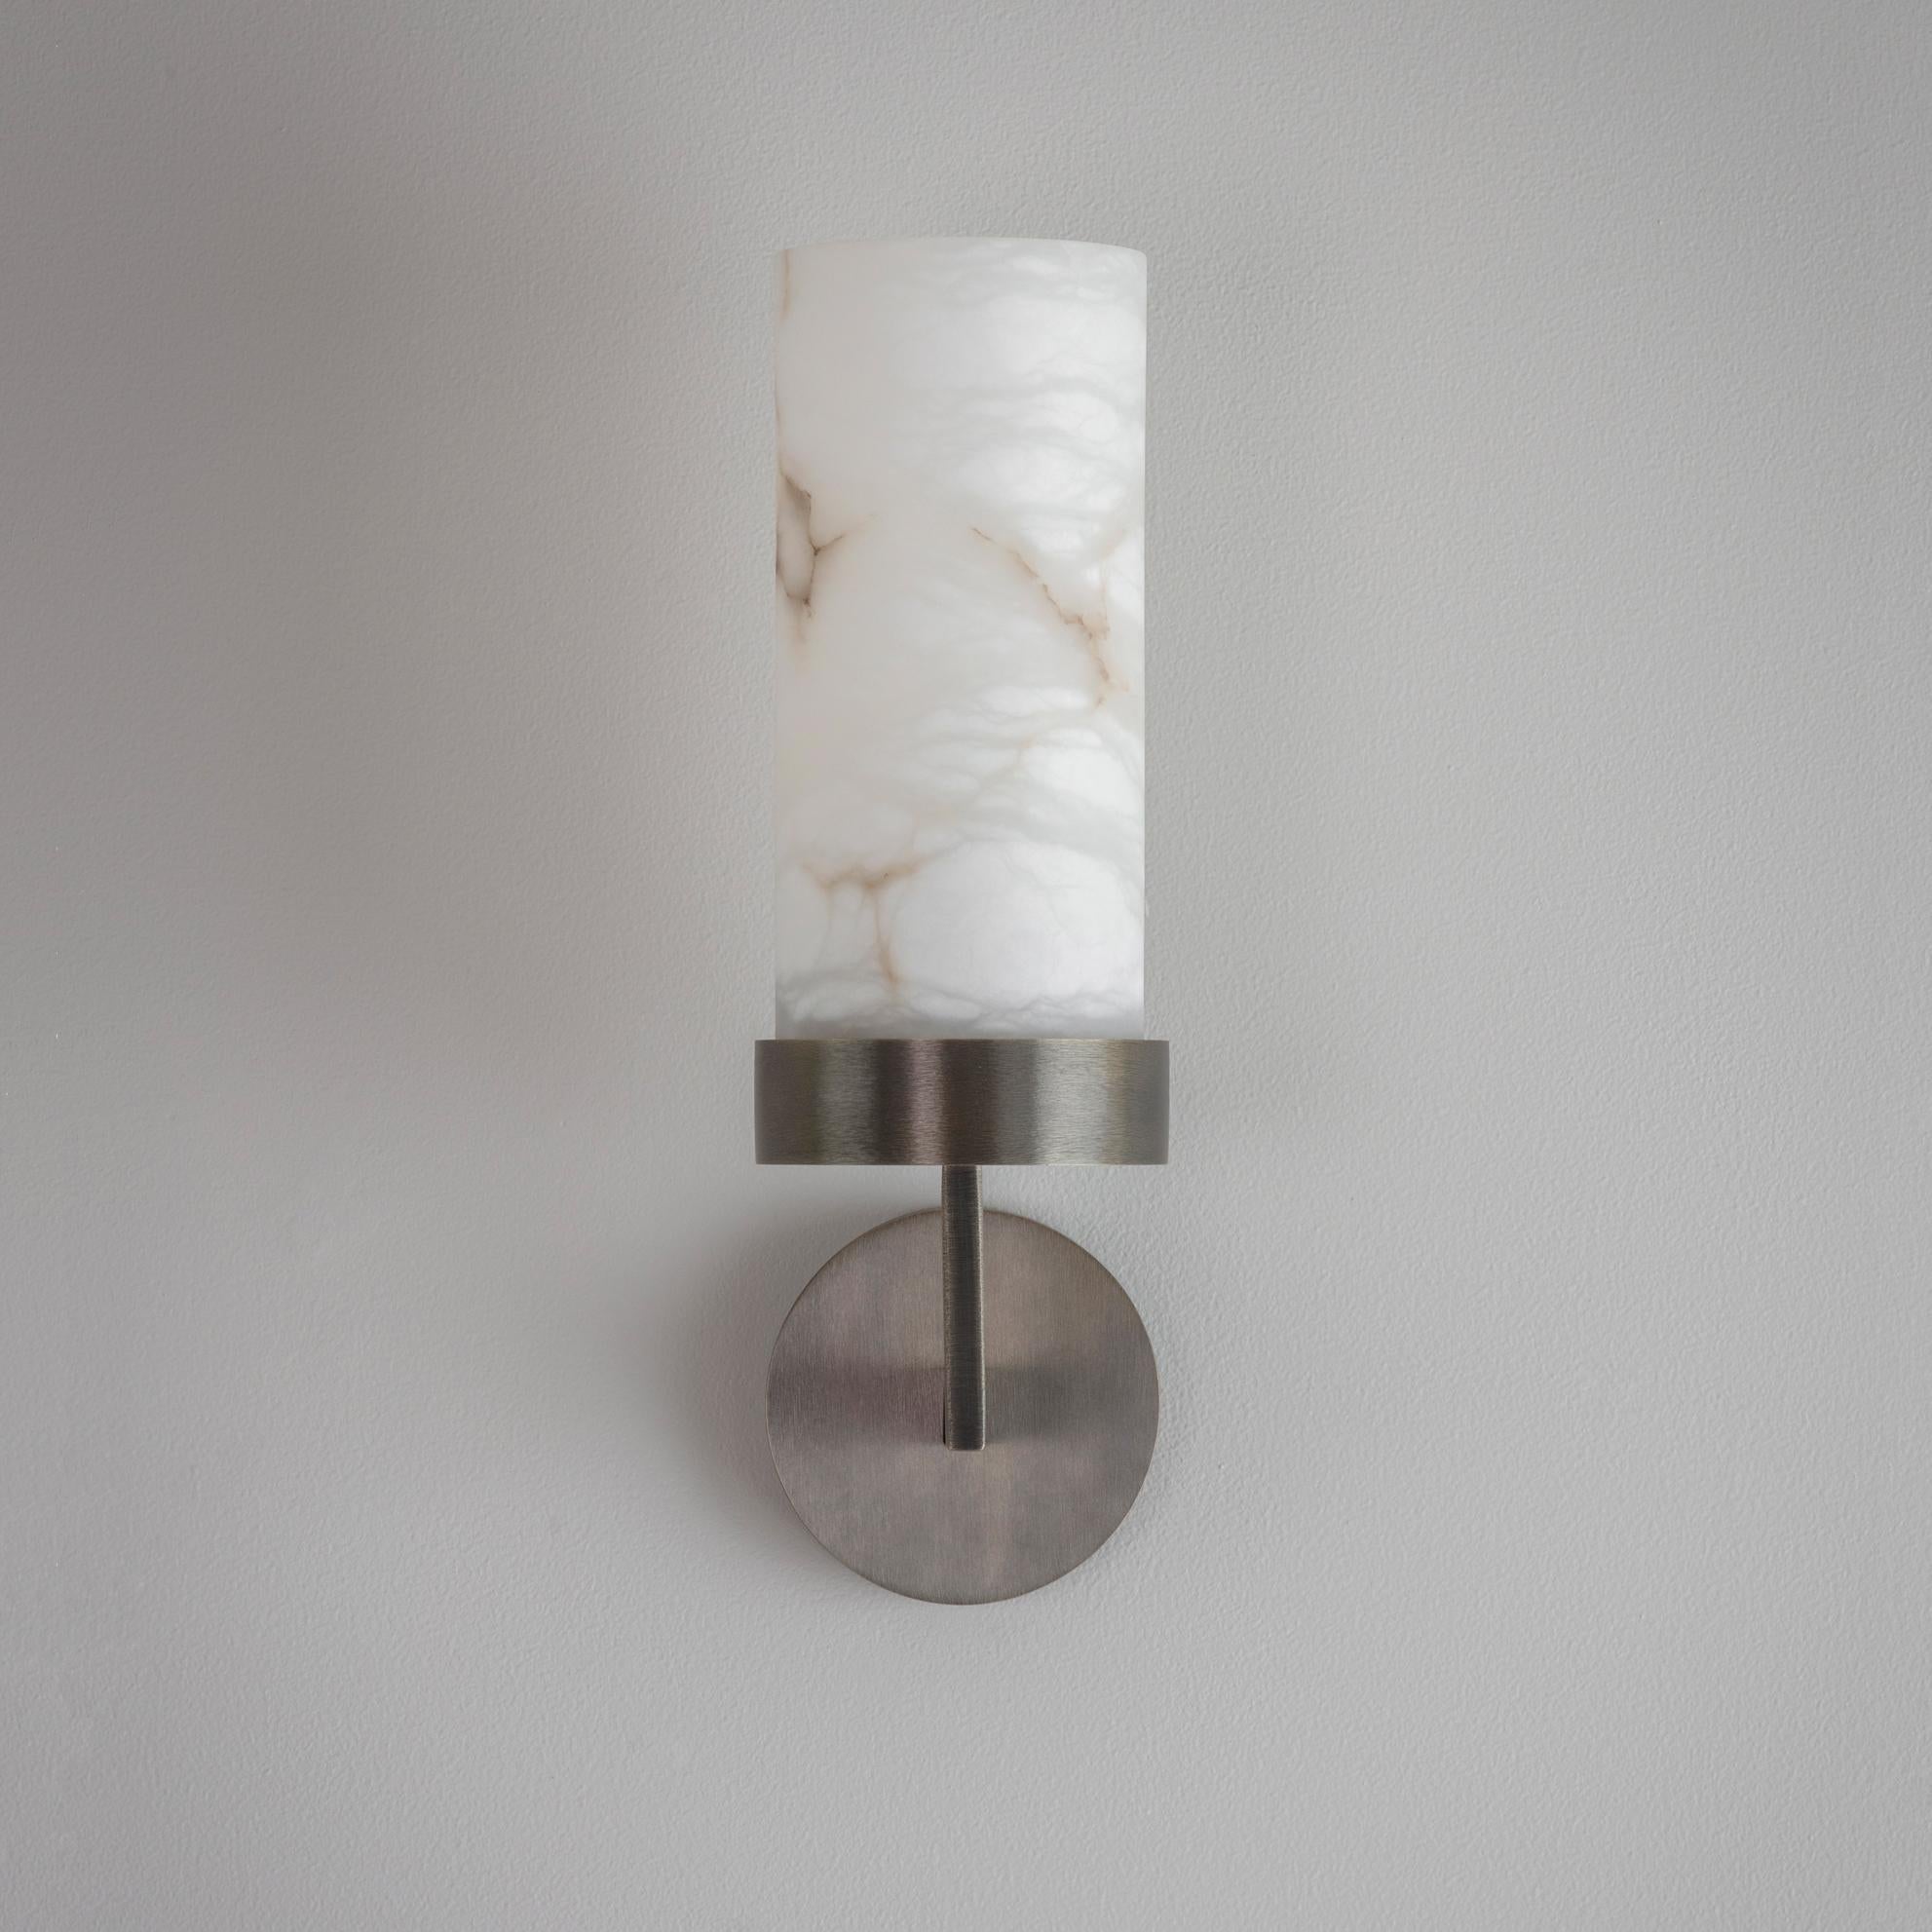 An elegant wall light featuring shades hewn from solid alabaster. The soft opalescent alabaster shade is offset by the clean contemporary lines of the hand-grained metalwork. When lit, the alabaster shade offers a stunning diffused light and